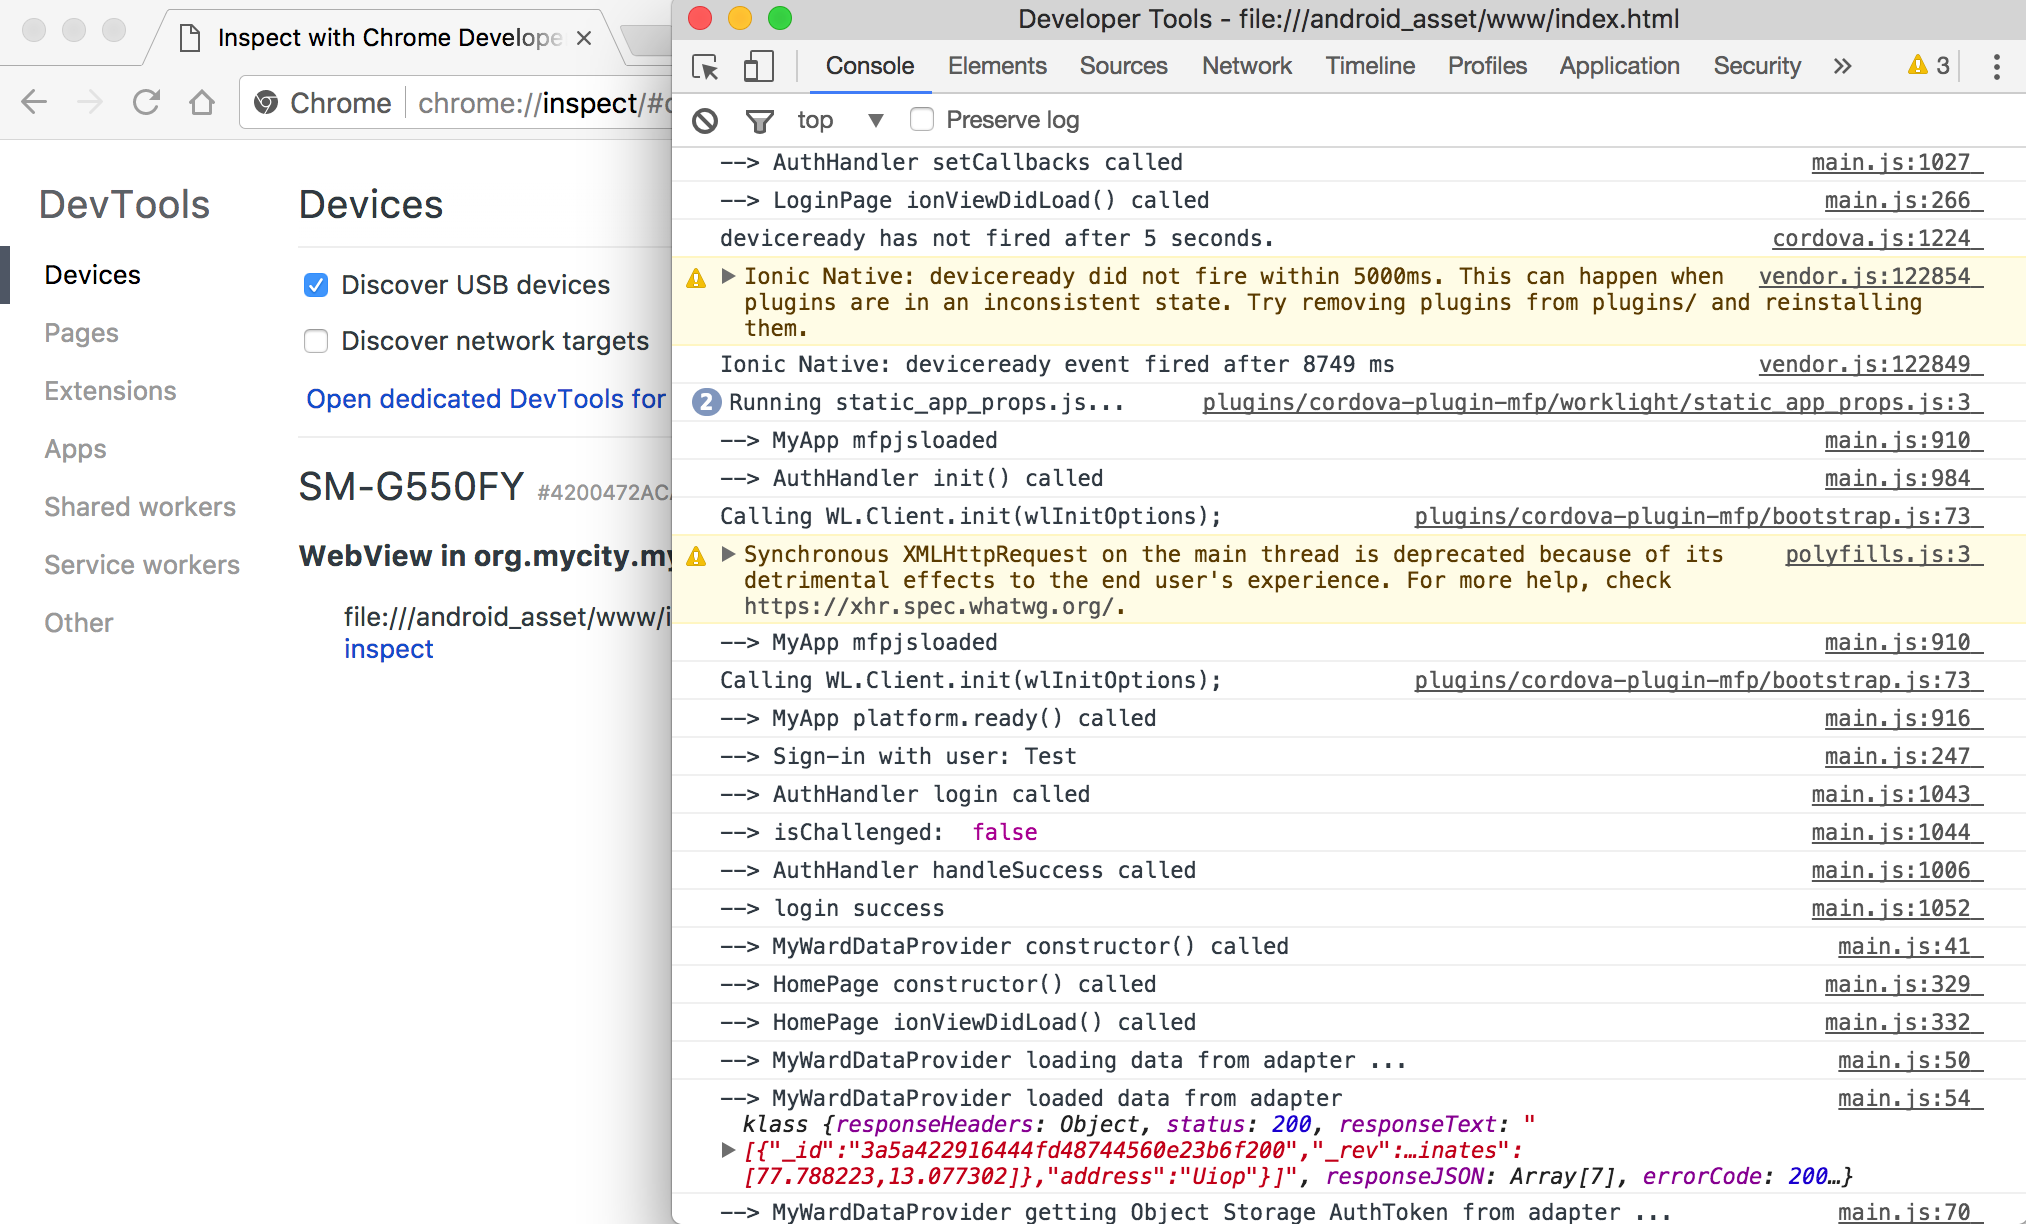 Debugging of Android app using Chrome Developer Tools